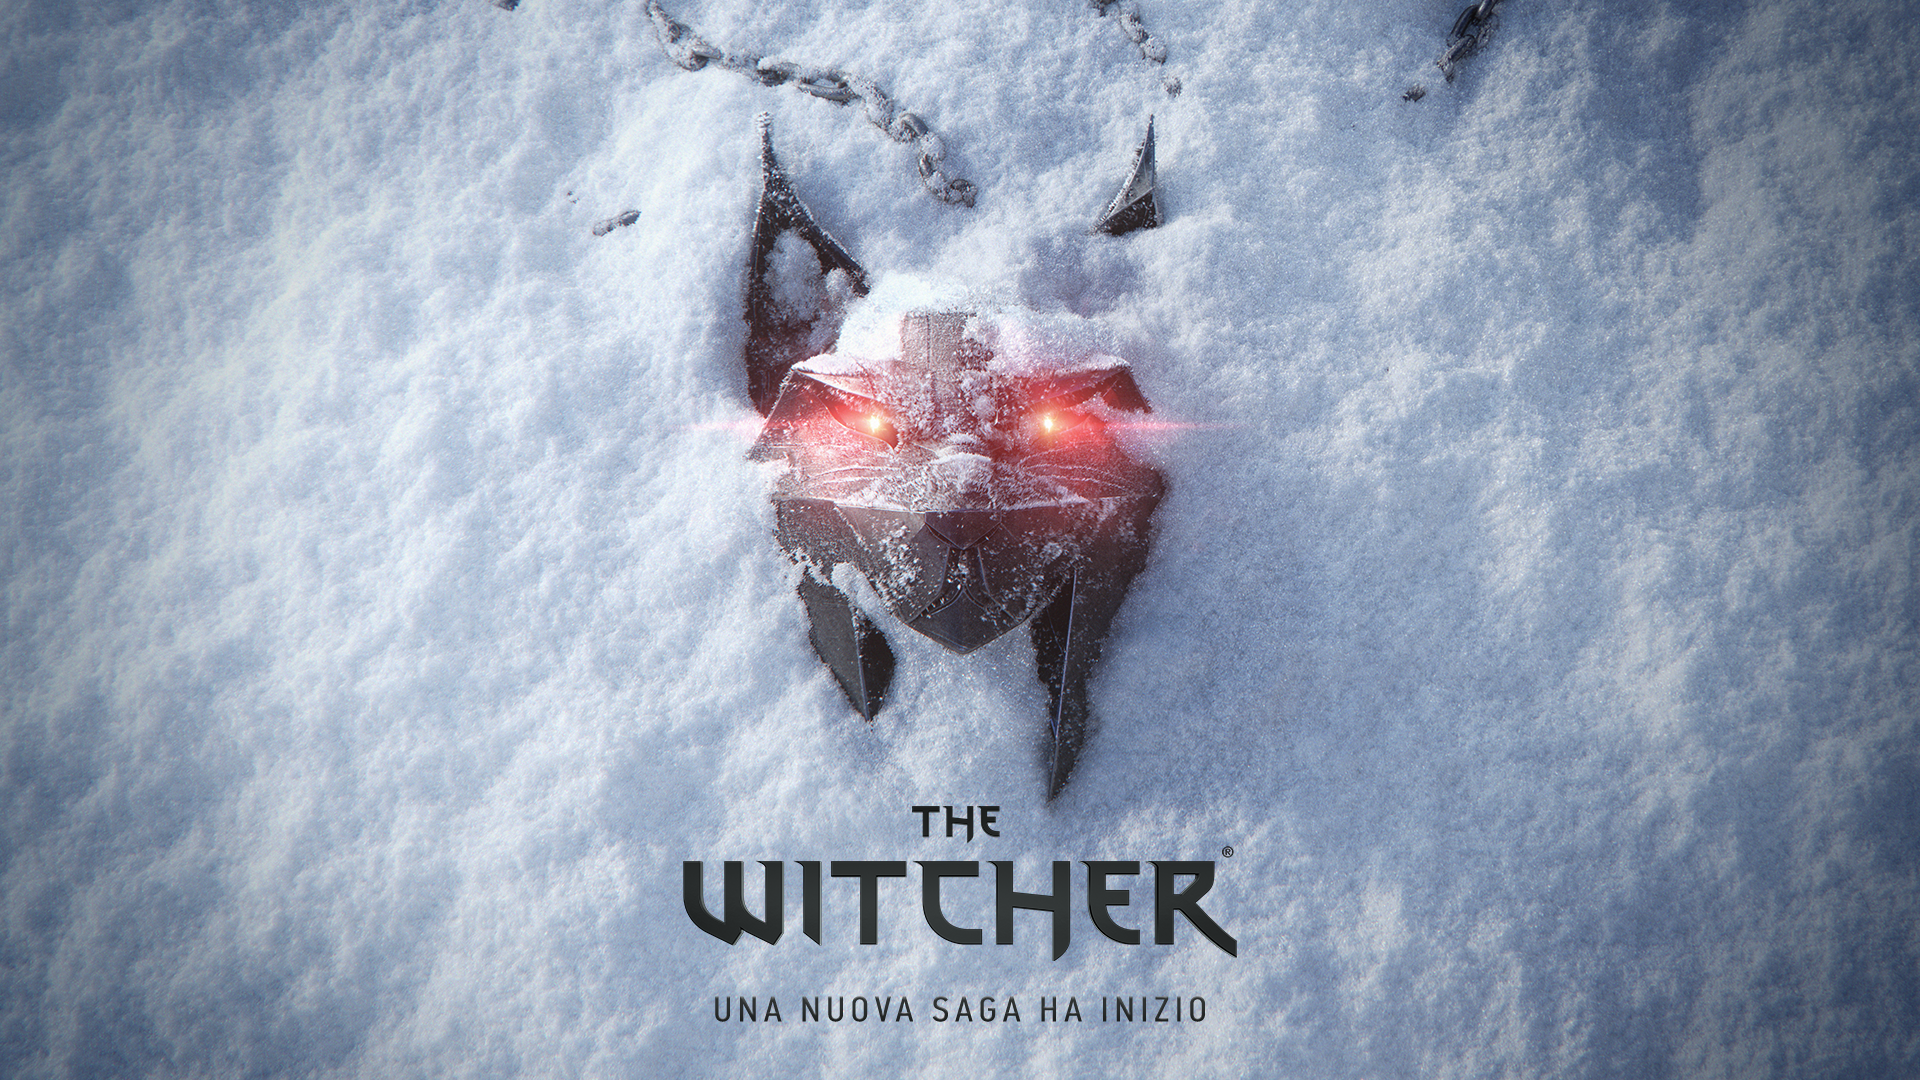 The Witcher: updates on the new game from CD Projekt RED